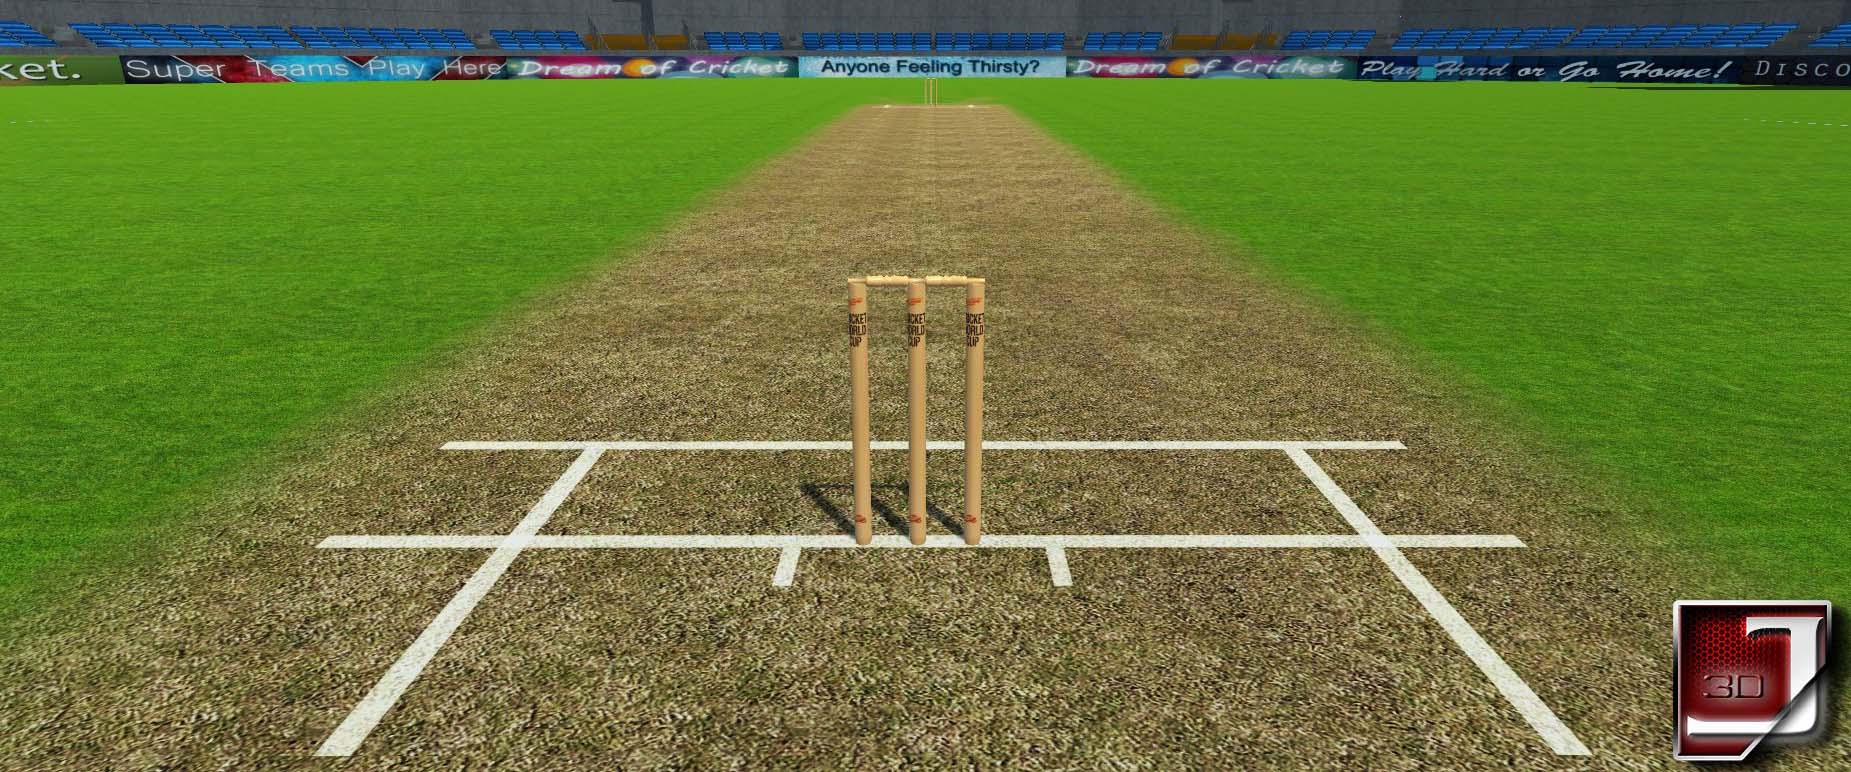 NATIONAL INSTITUTE OF EDUCATION DEVELOPMENT SOCIETY & SPORTS COUNCIL - Cricket Field